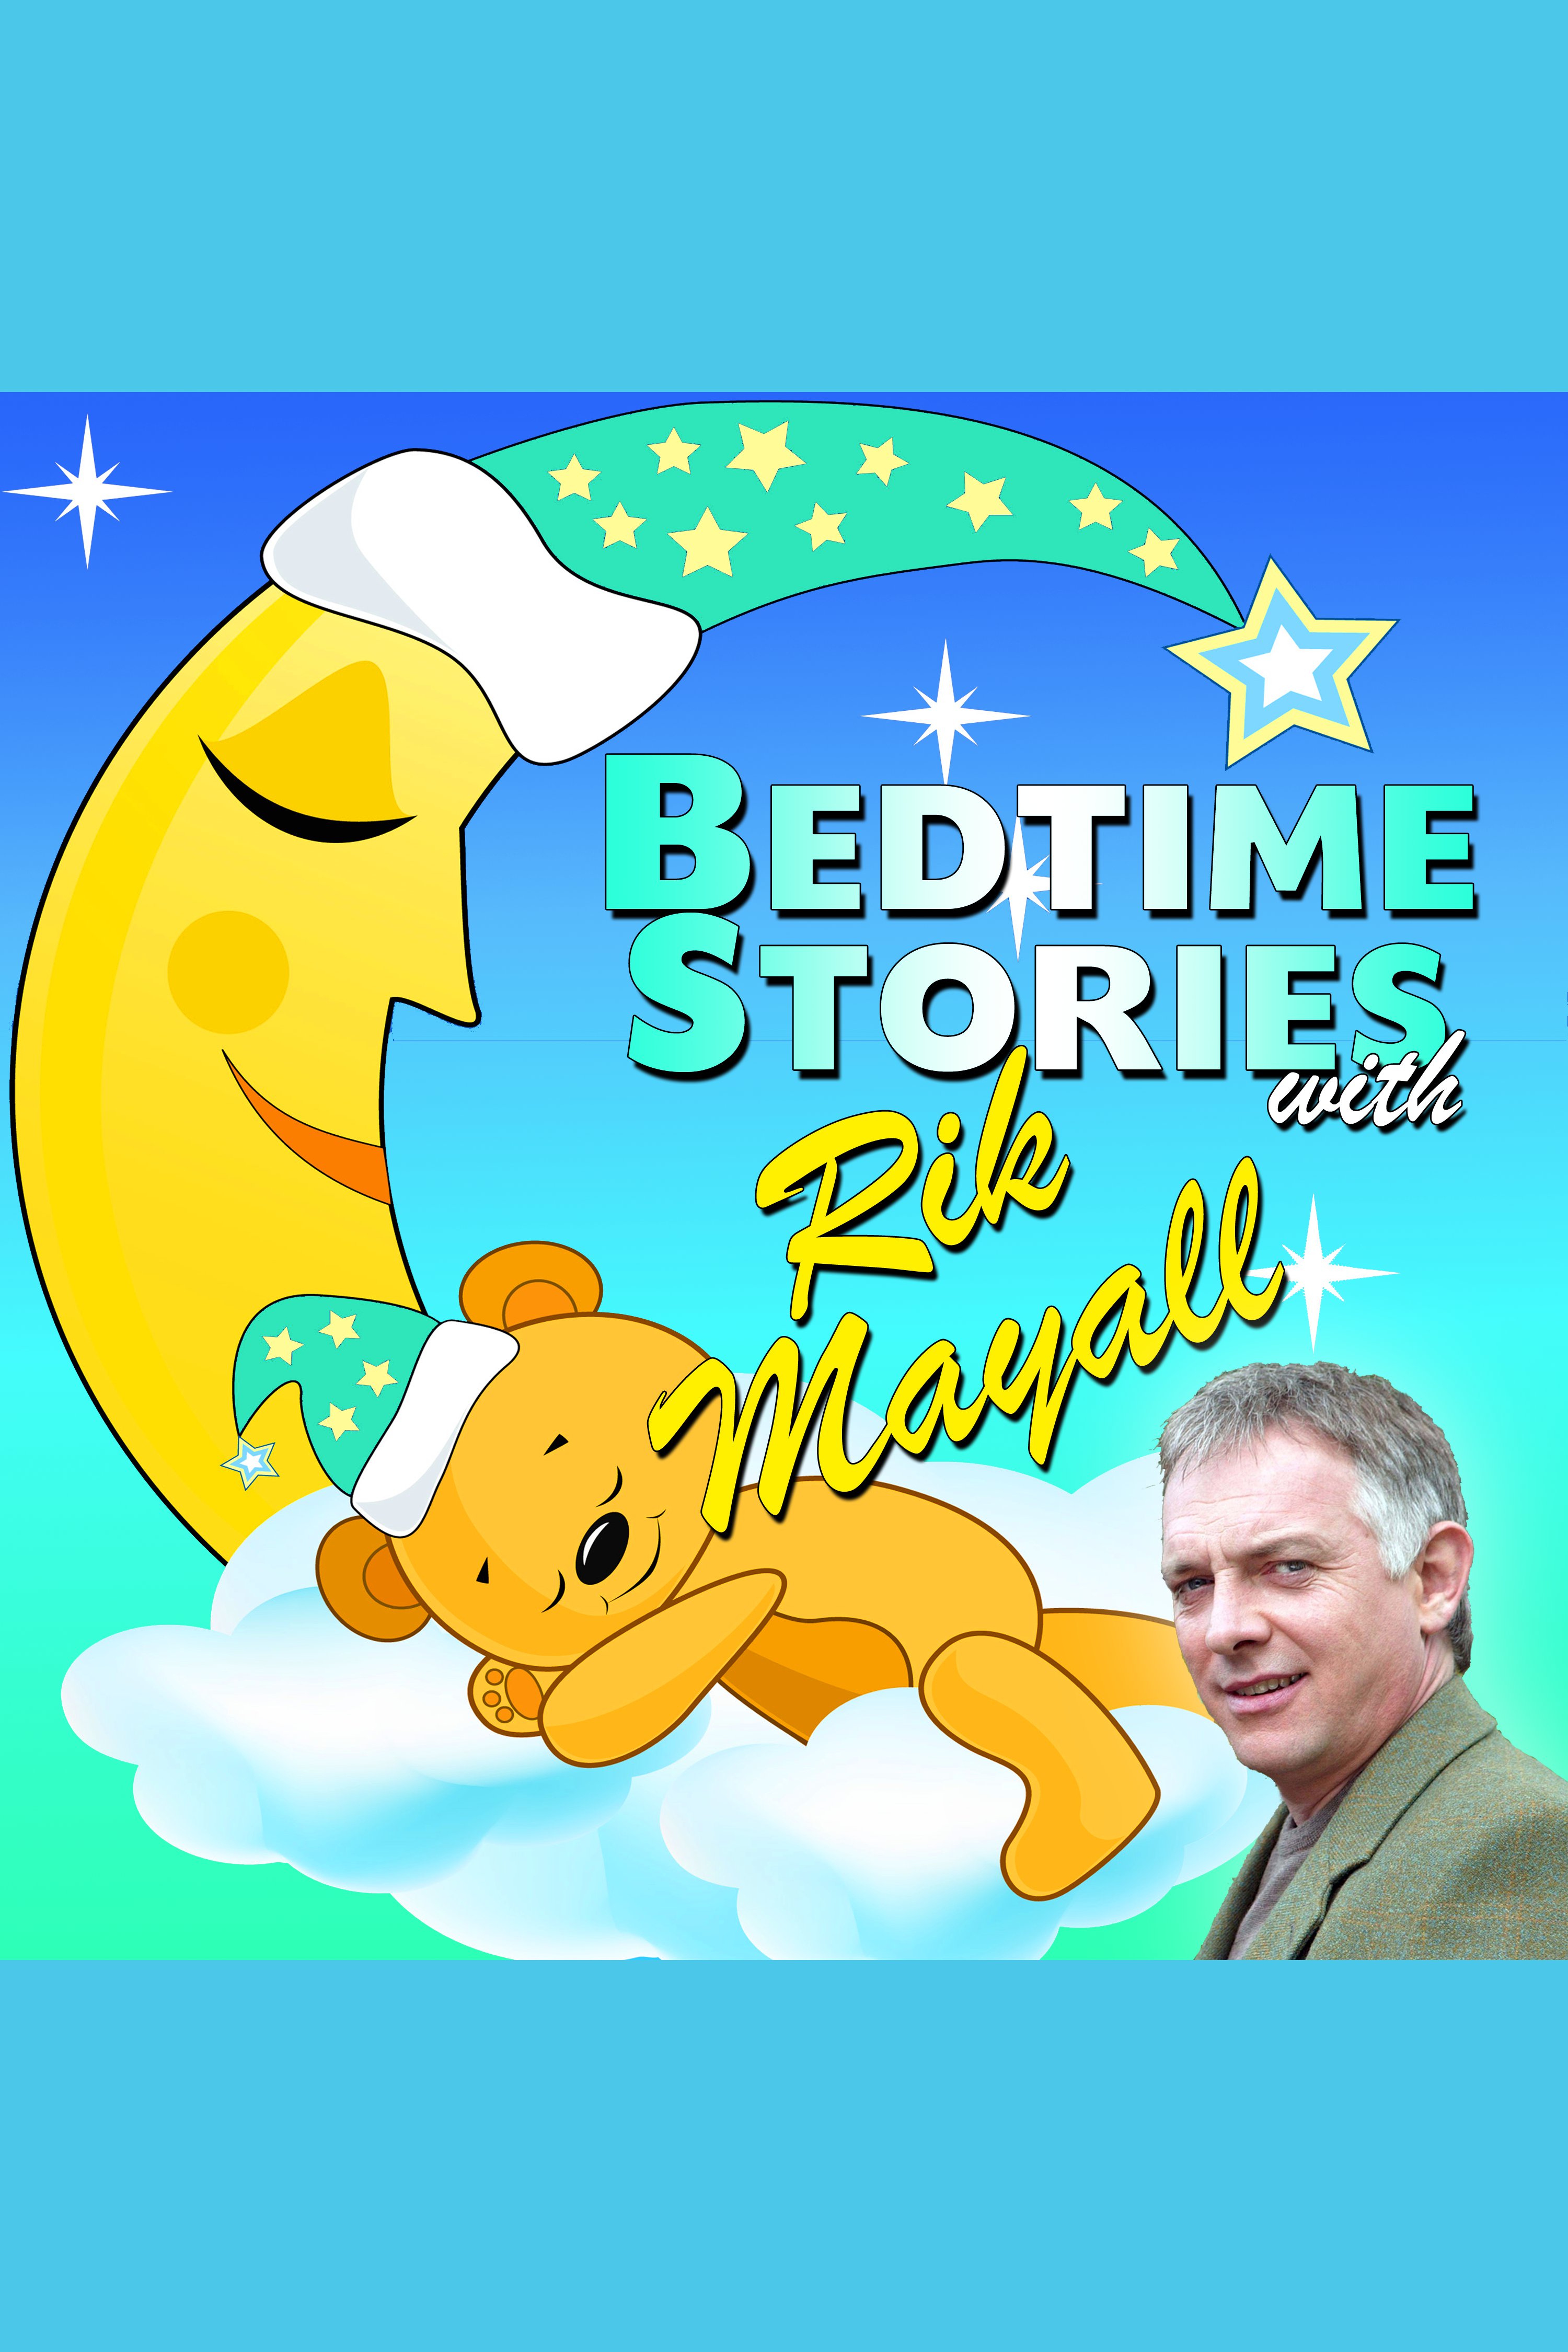 Bedtime Stories with Rik Mayall cover image